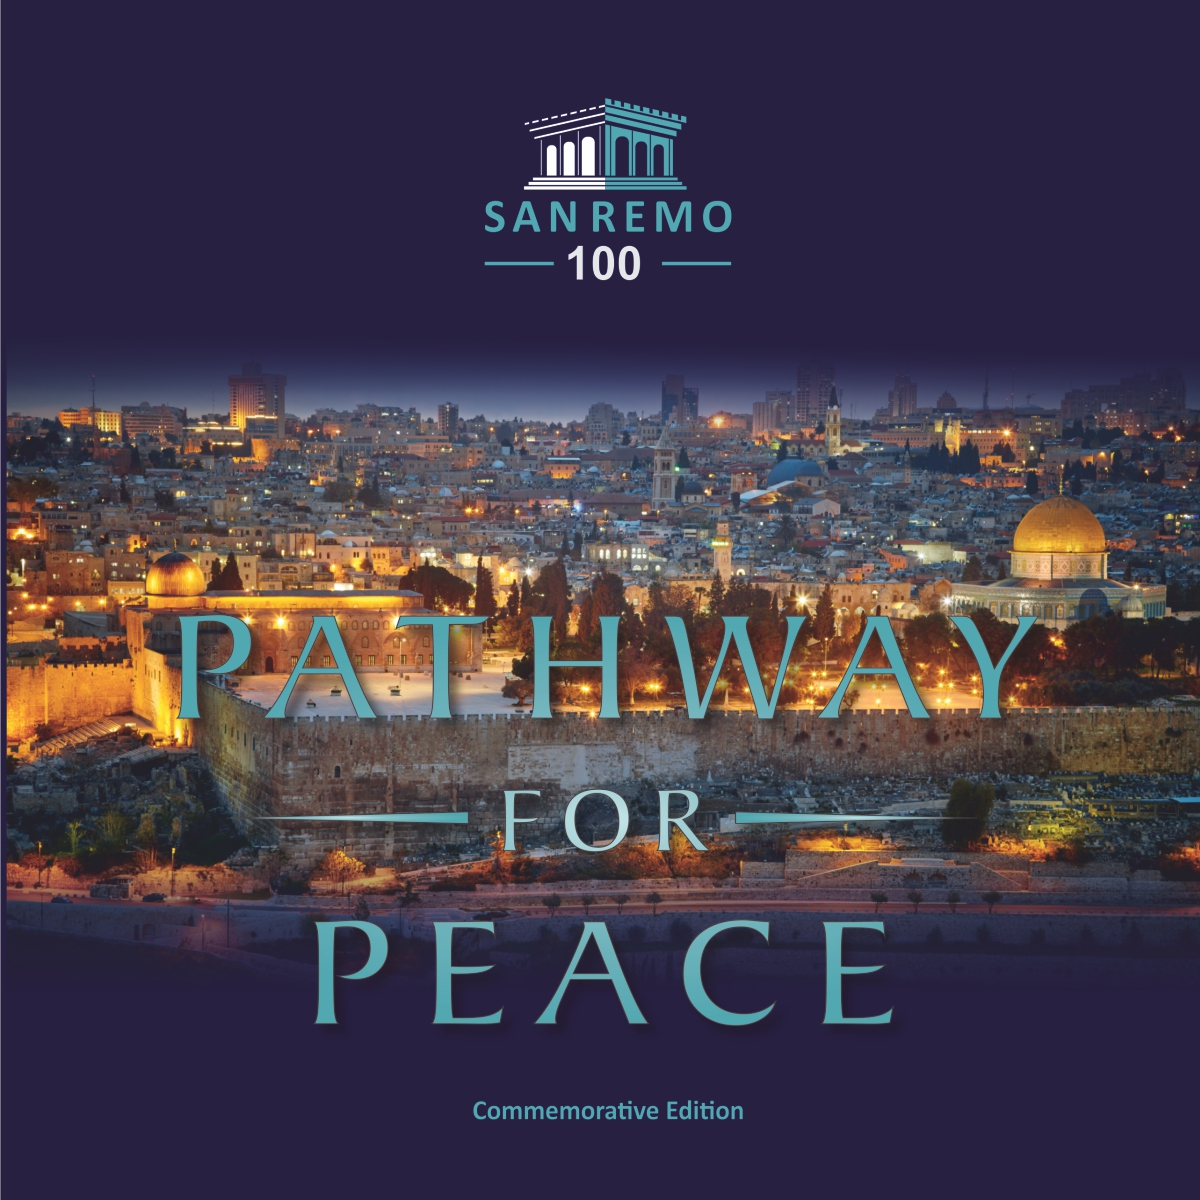 San Remo - Pathway for Peace